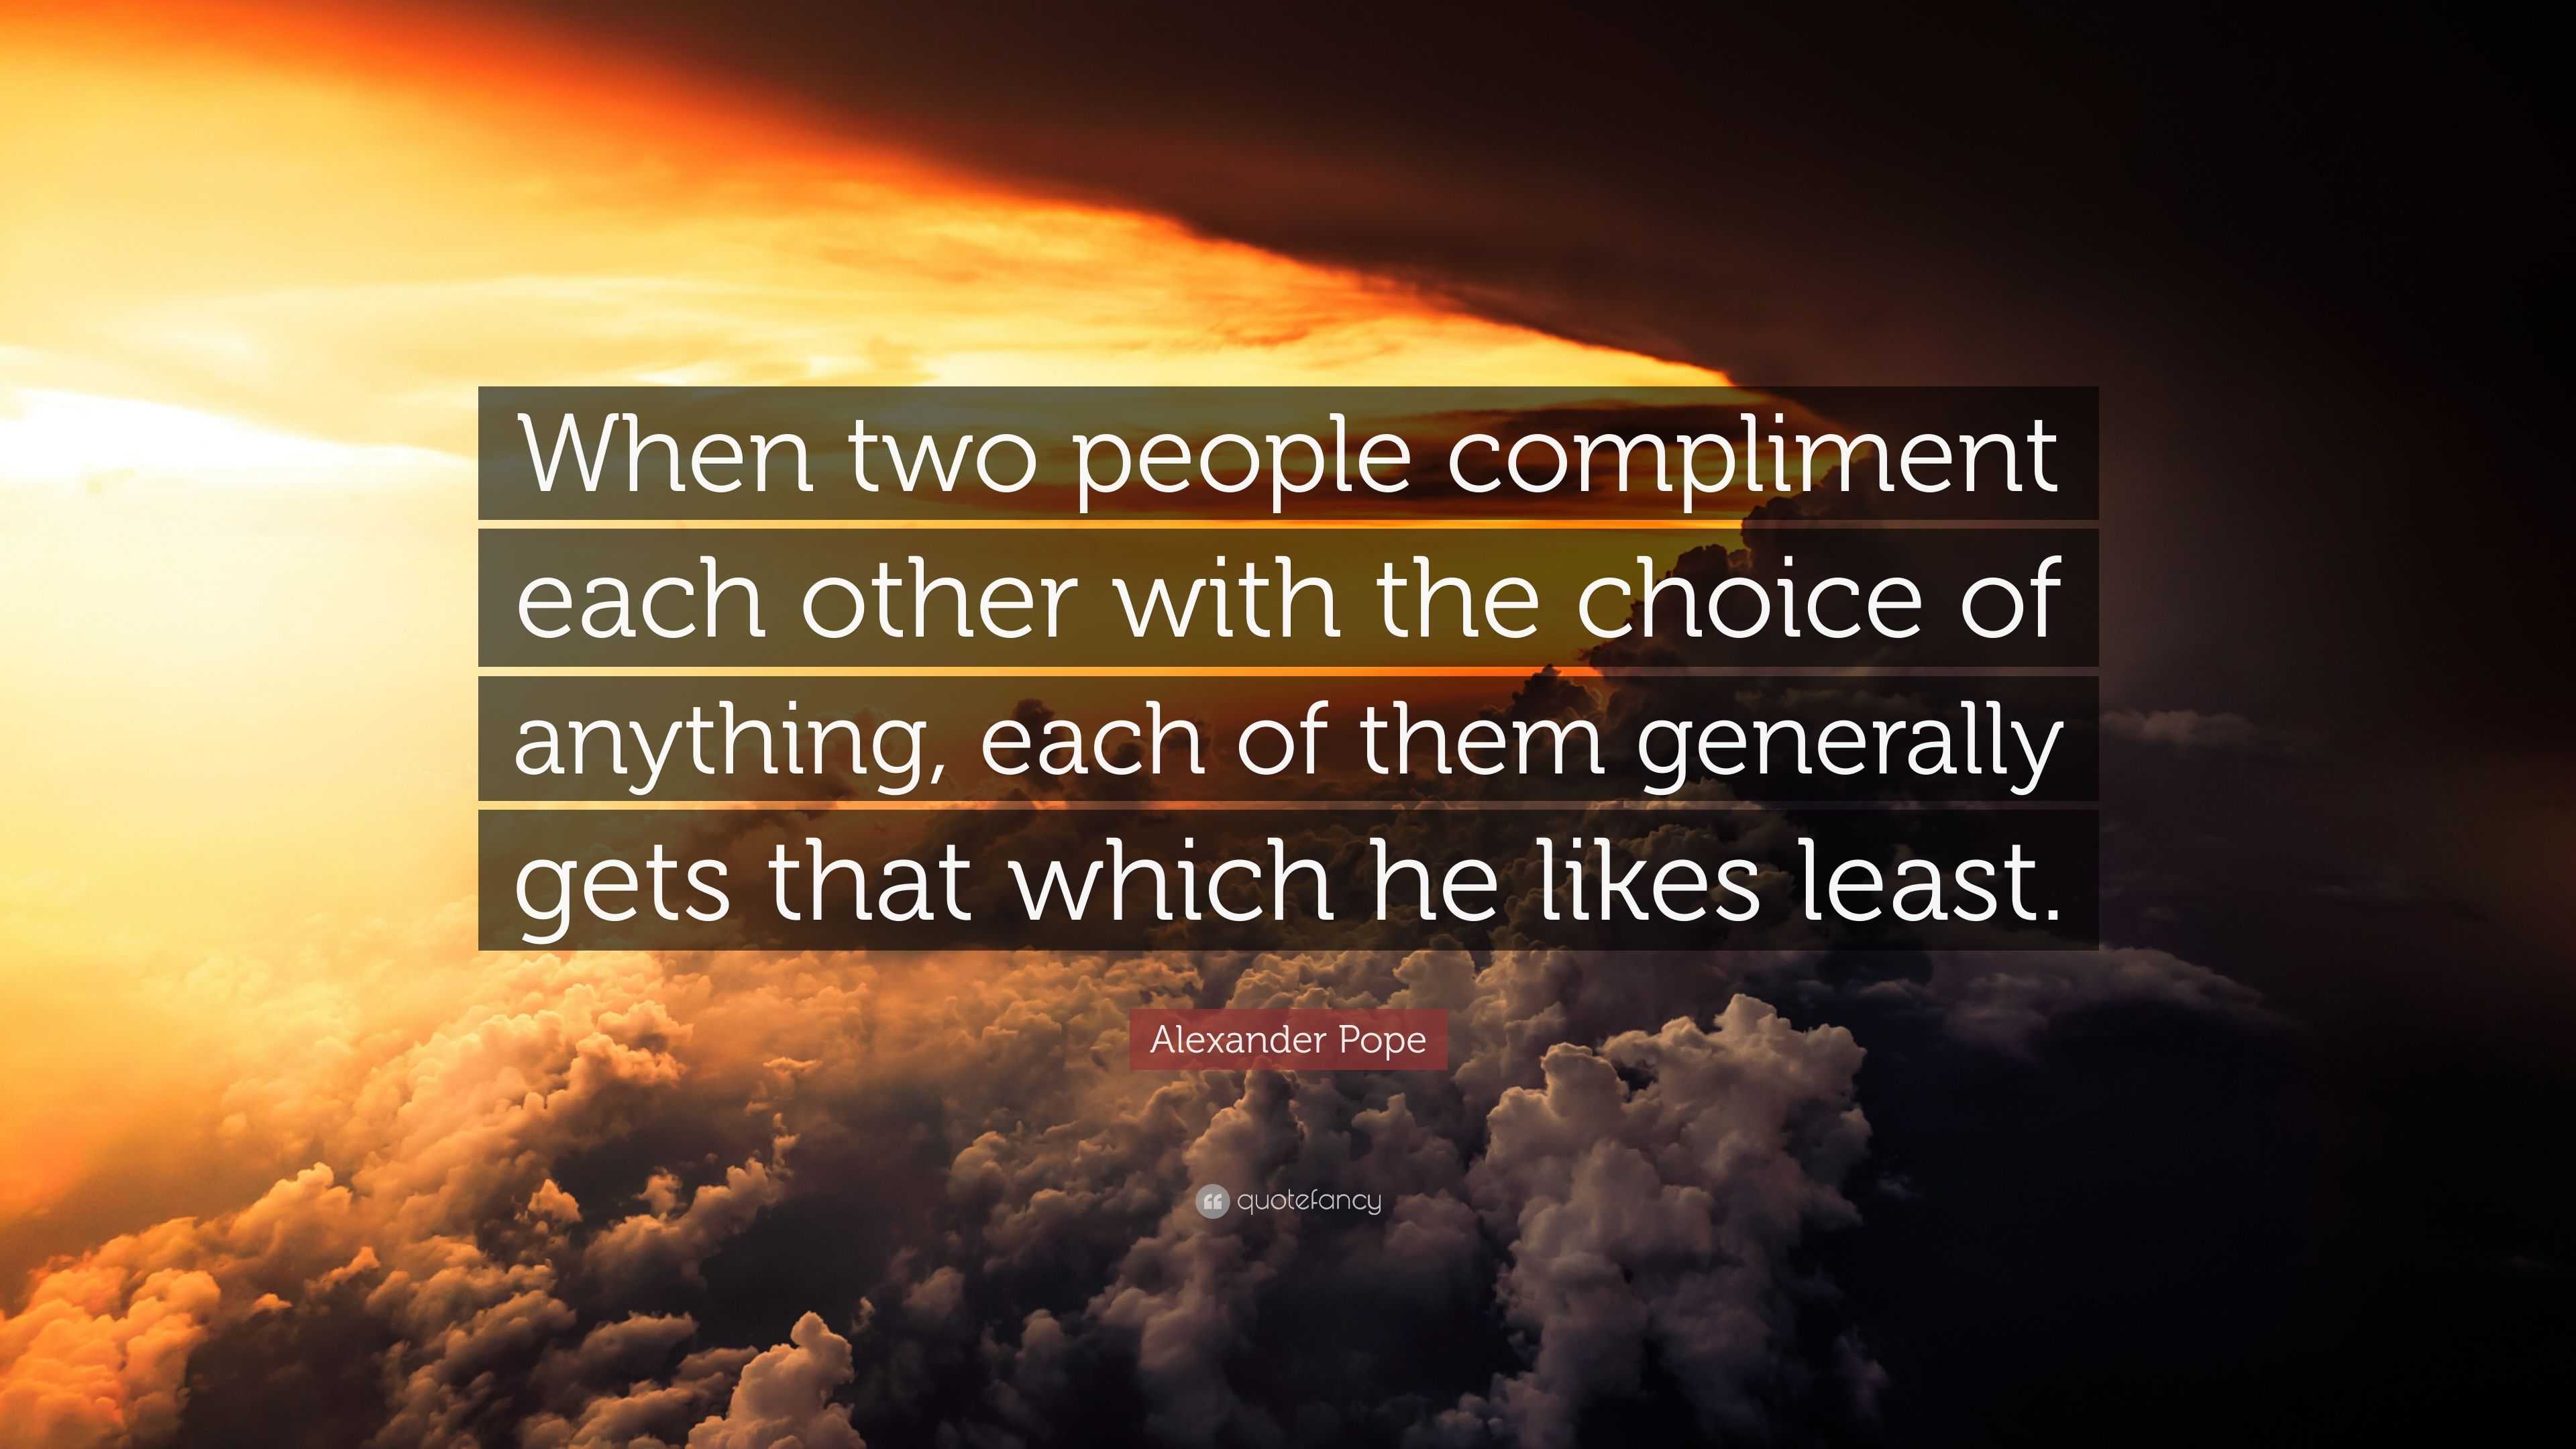 Alexander Pope Quote: “When two people compliment each other with the ...